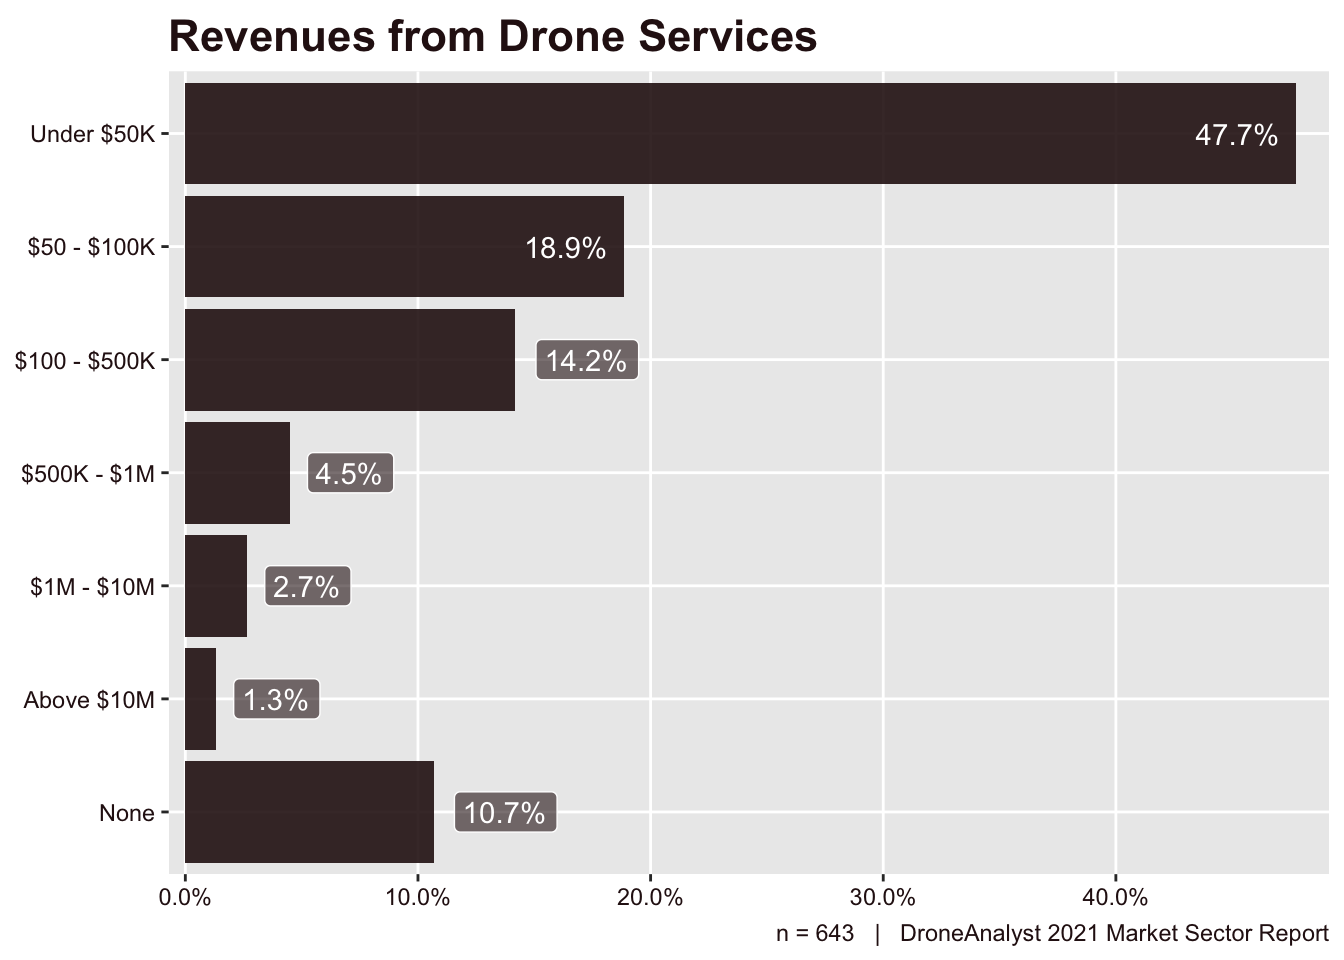 Revenues from Drone Services